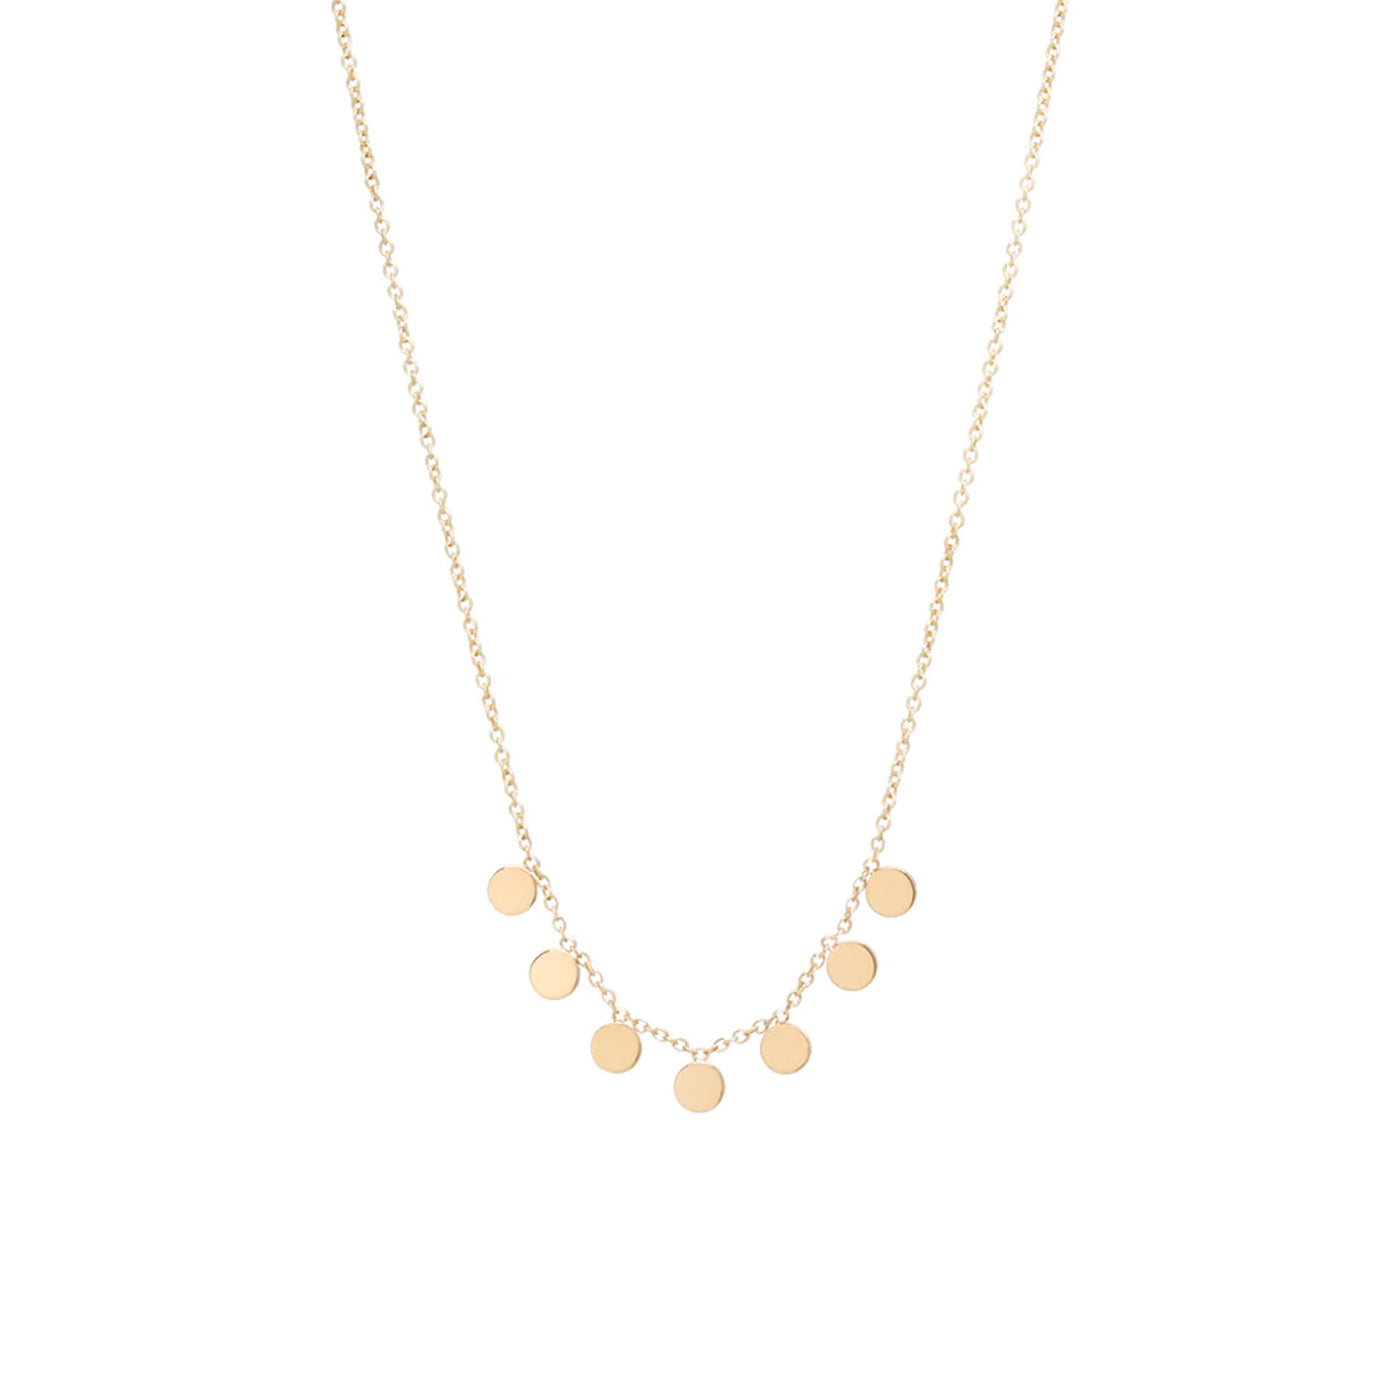 7 Itty Bitty Disc Necklace